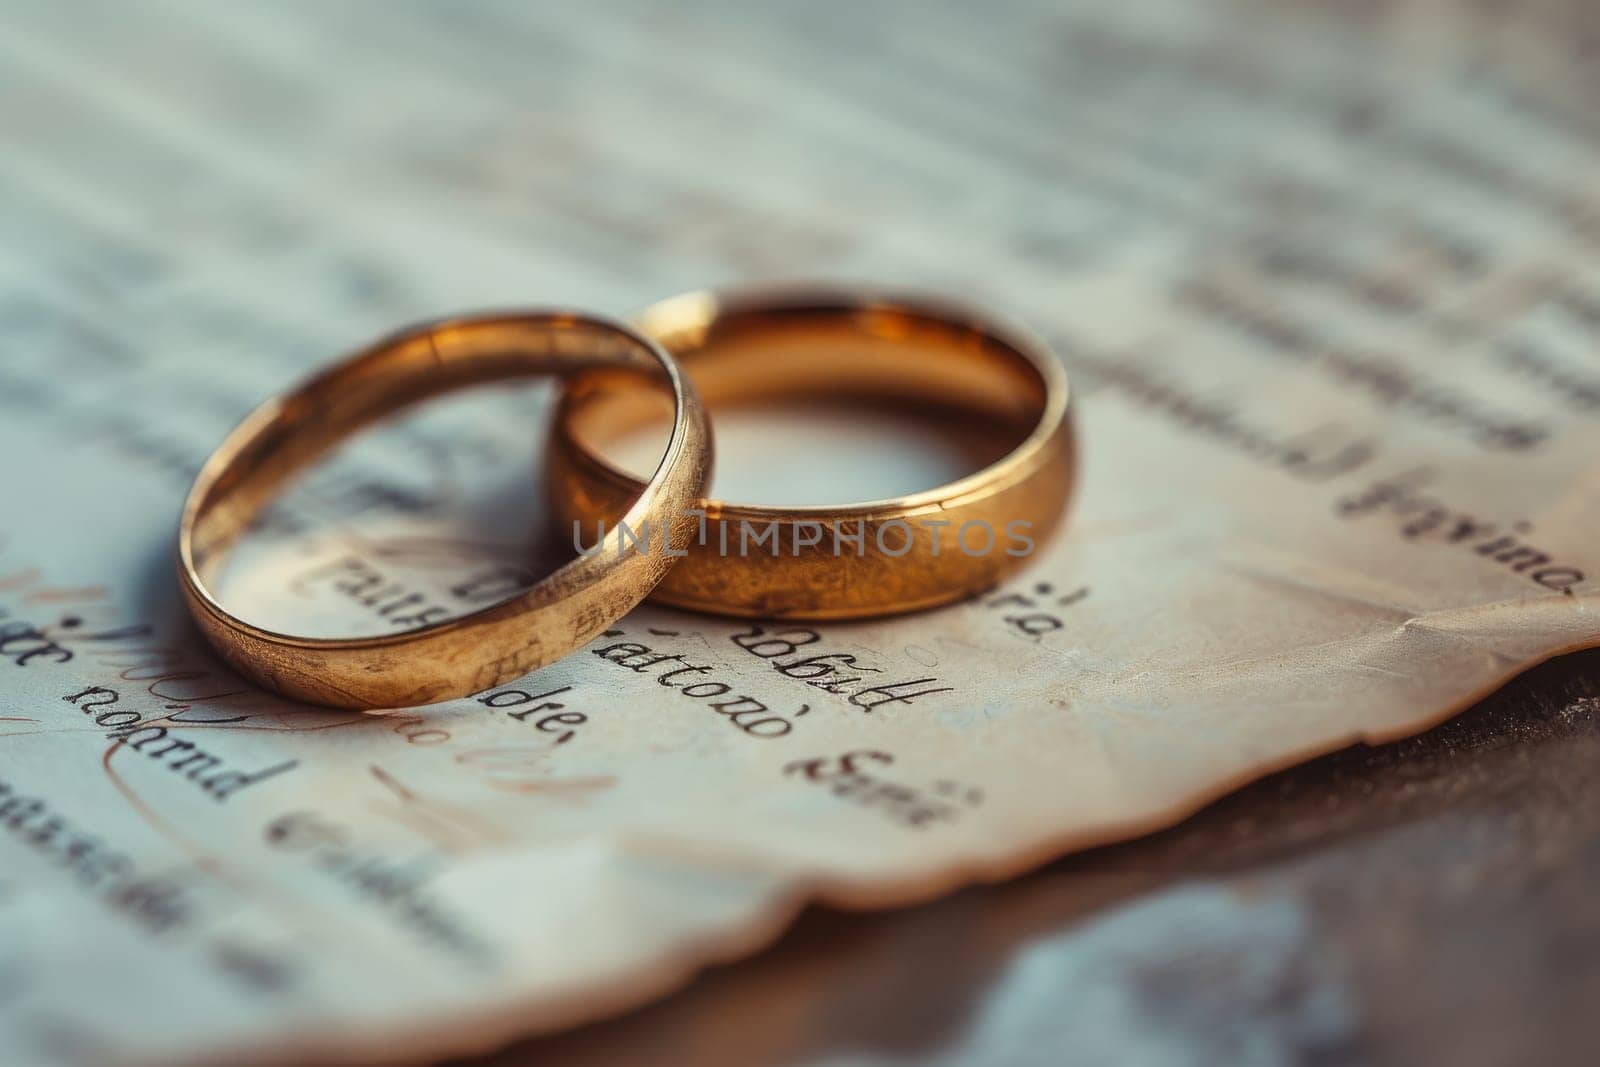 Two gold wedding rings on a piece of paper. The rings are placed on top of the paper, and the paper is slightly crumpled. Concept of love and commitment